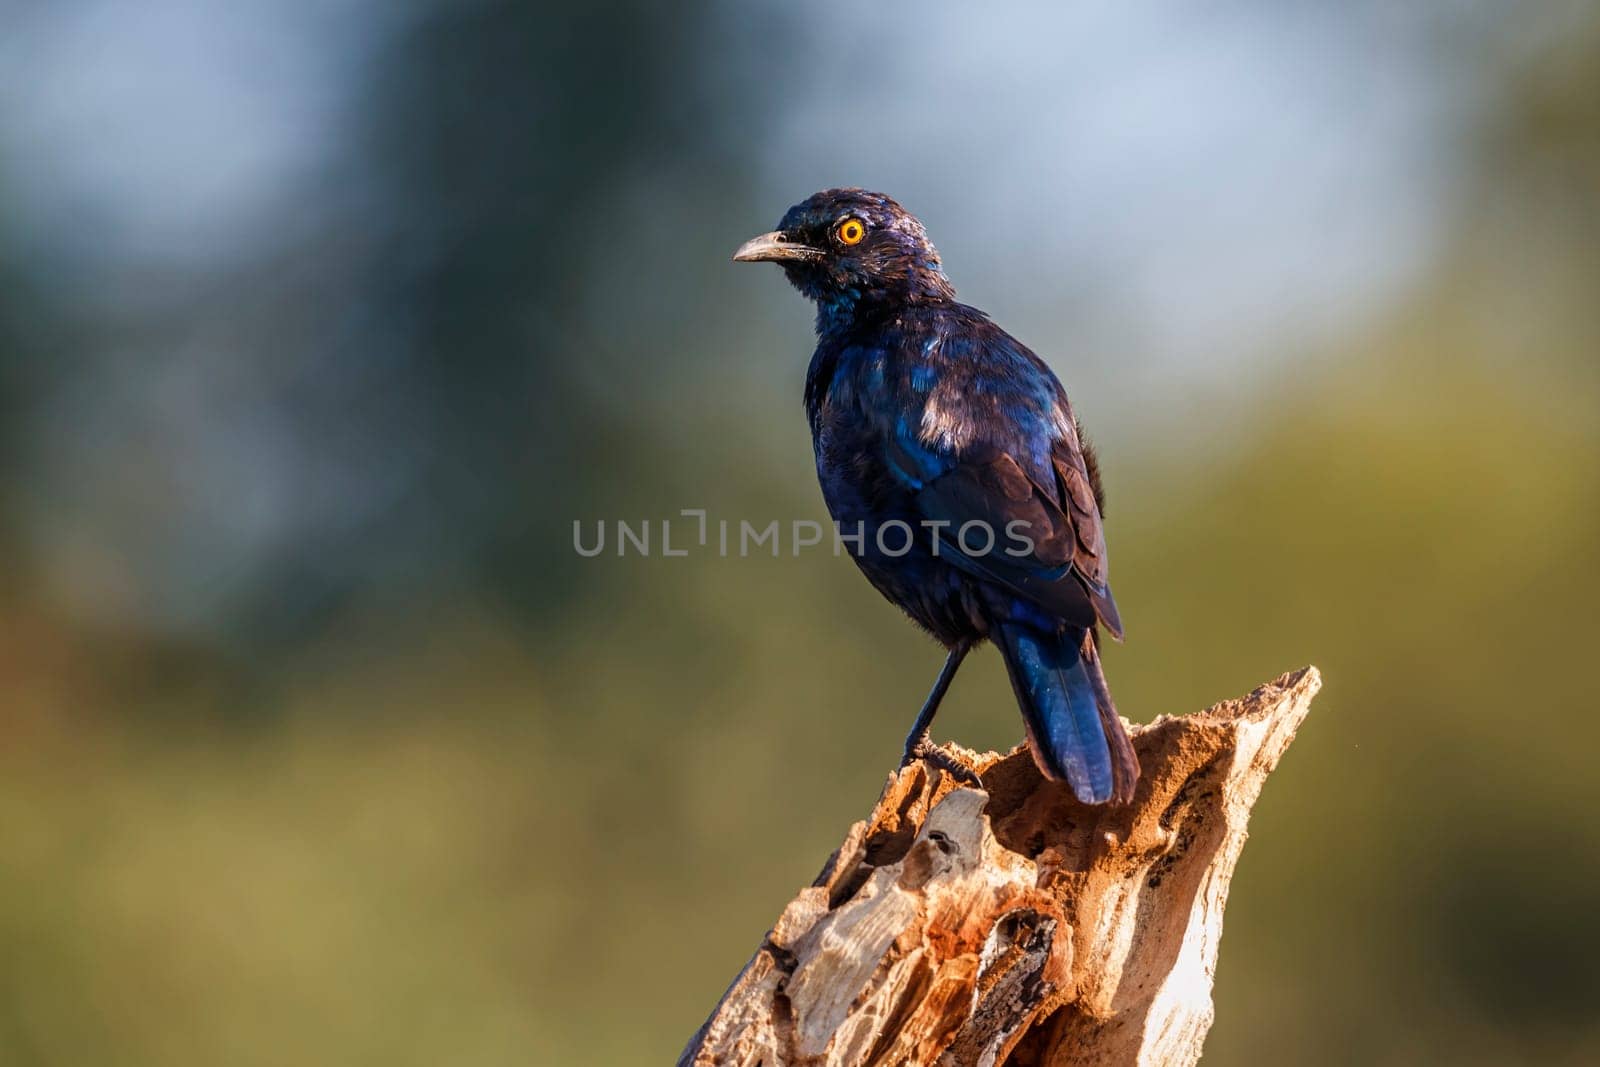 Cape Glossy Starling in Kruger National park, South Africa by PACOCOMO